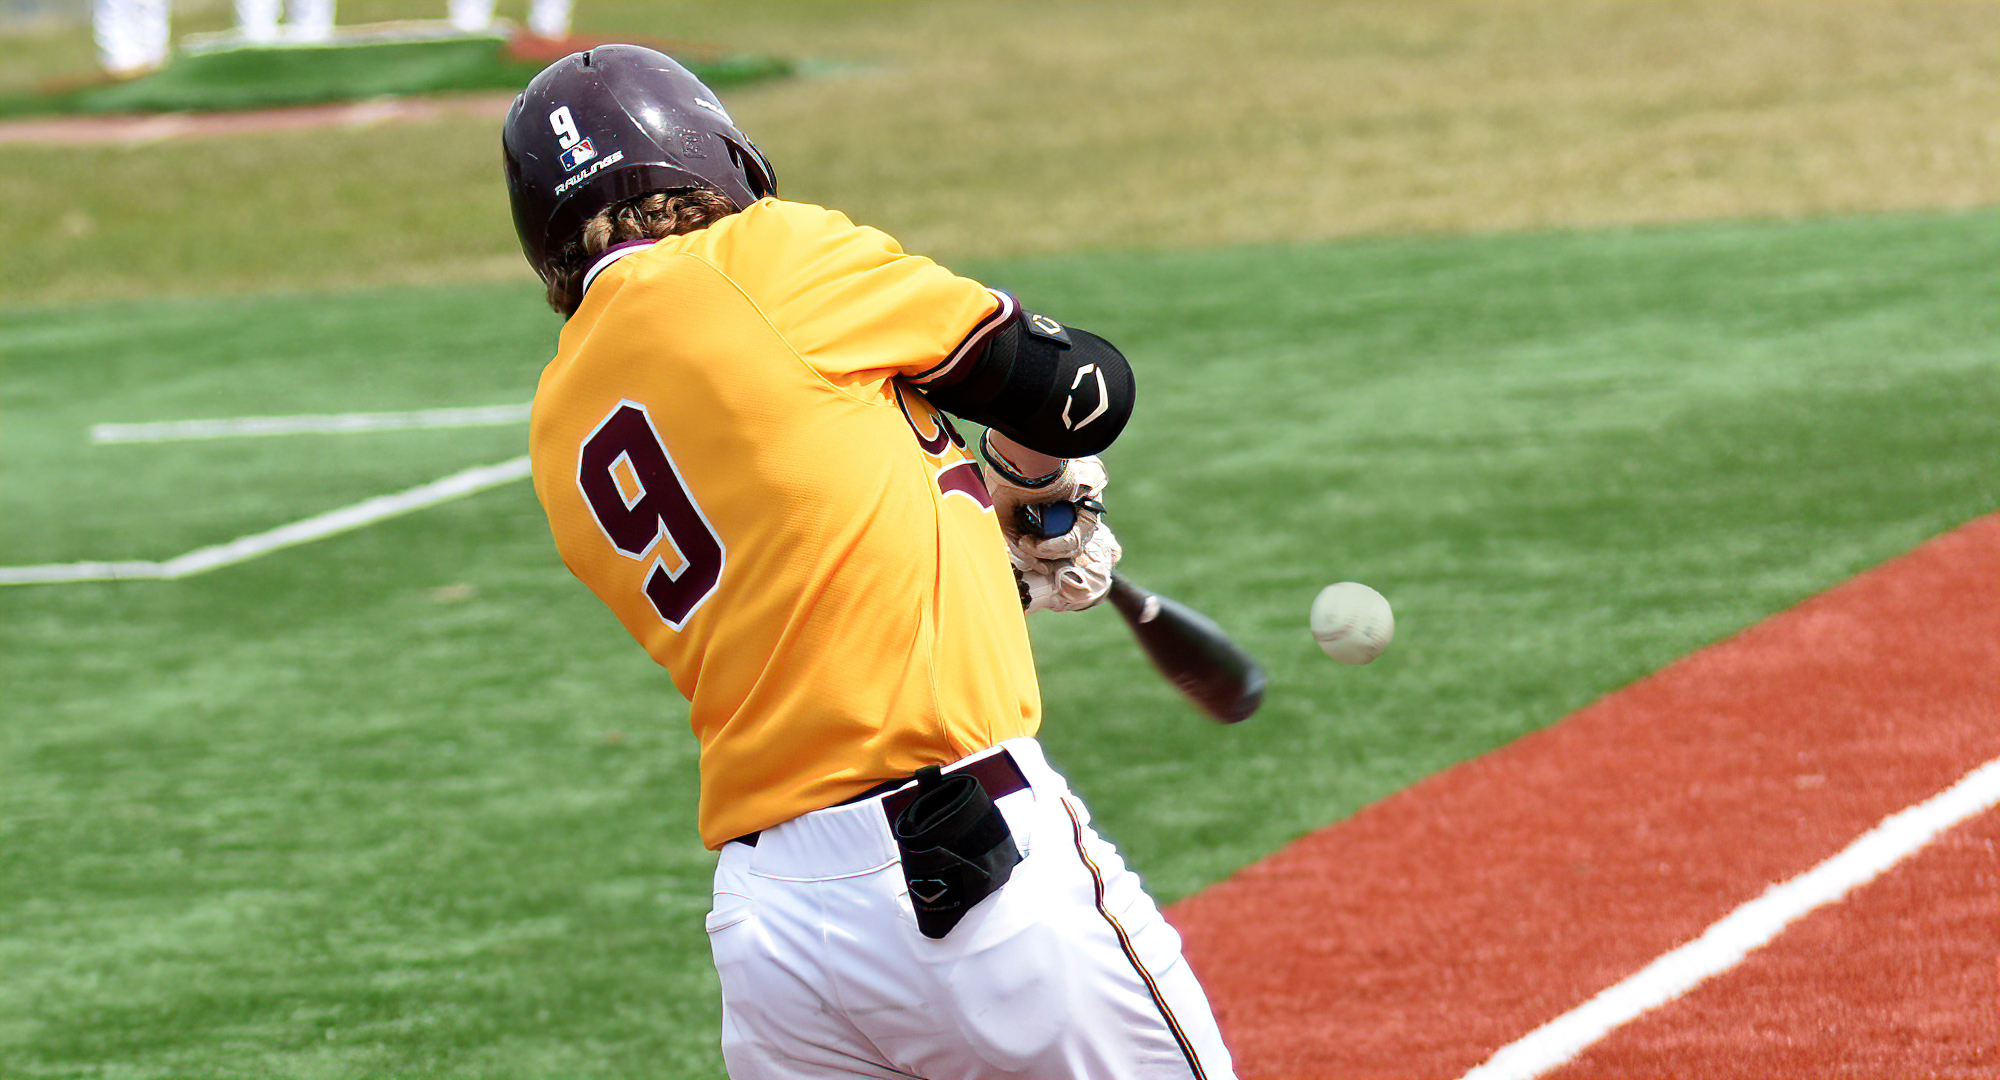 Senior Thomas Horan had a hit in each game of the Cobbers' split with Husson. He went 2-for-4 in Game 2.